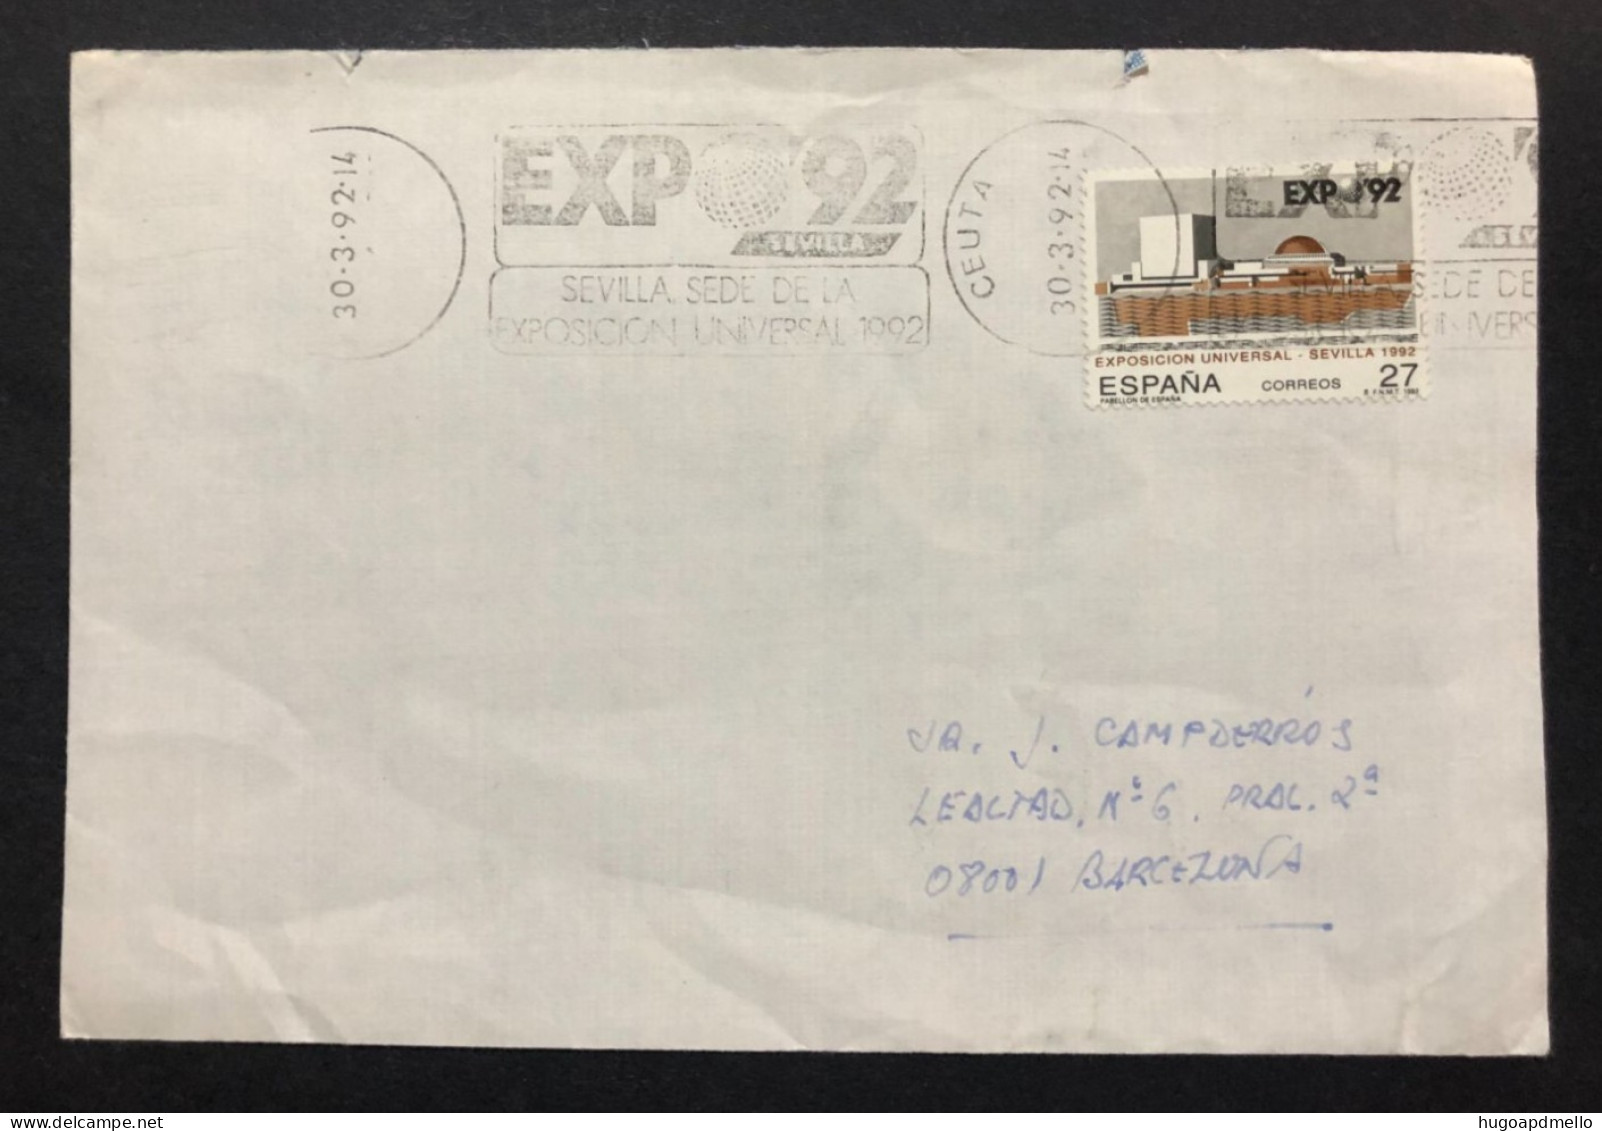 SPAIN, Cover With Special Cancellation « EXPO '92 », « CEUTA Postmark », 1992 - 1992 – Sevilla (Spanje)